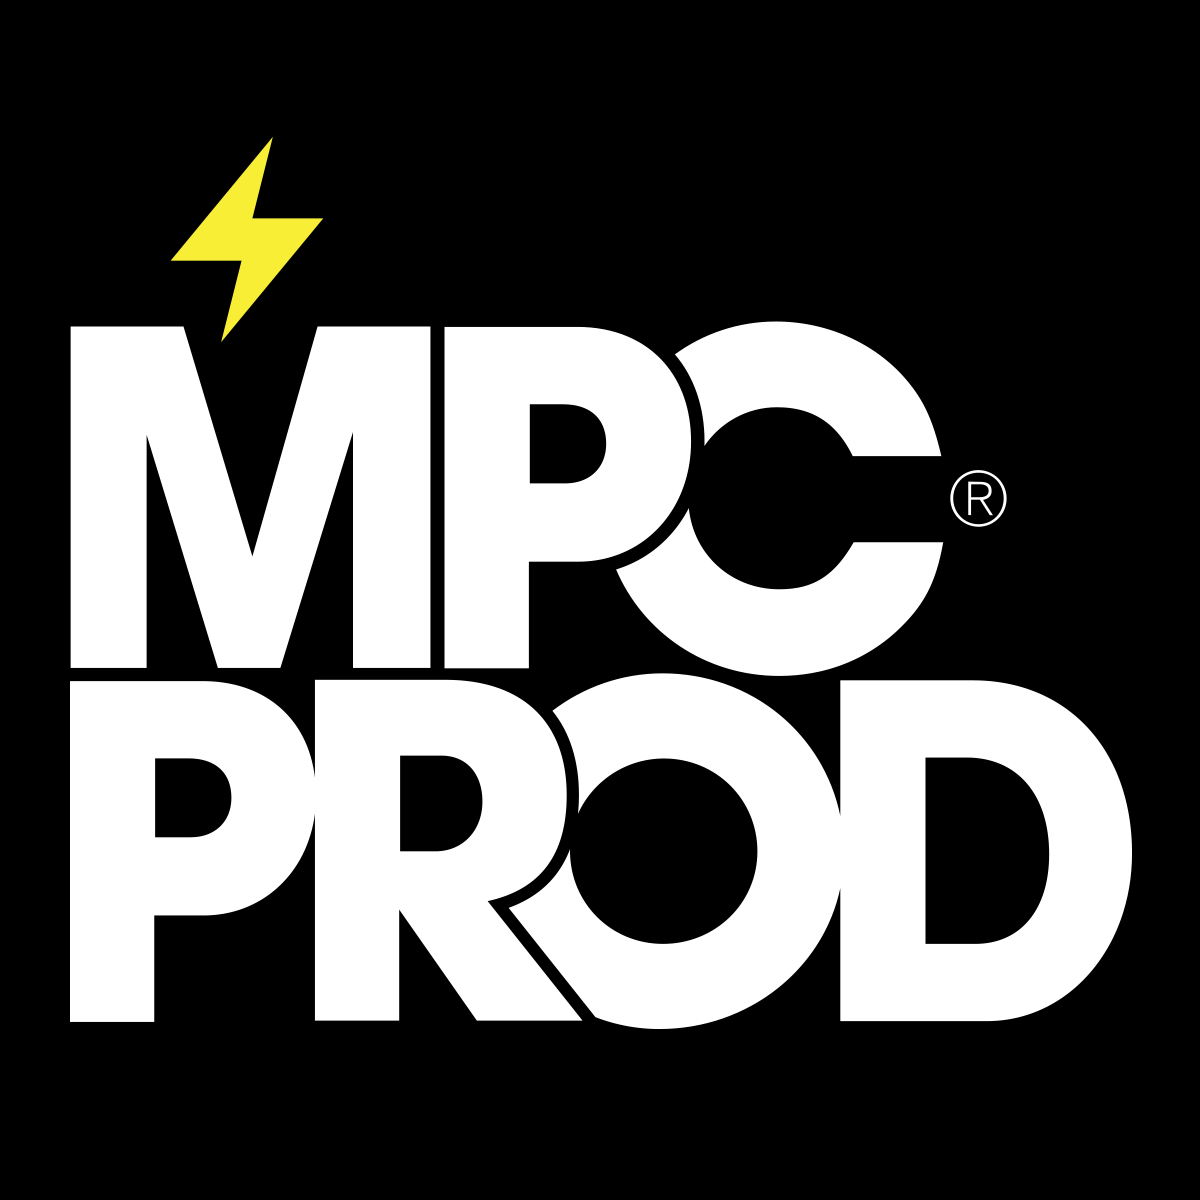 MPC-BE 1.6.8 for windows instal